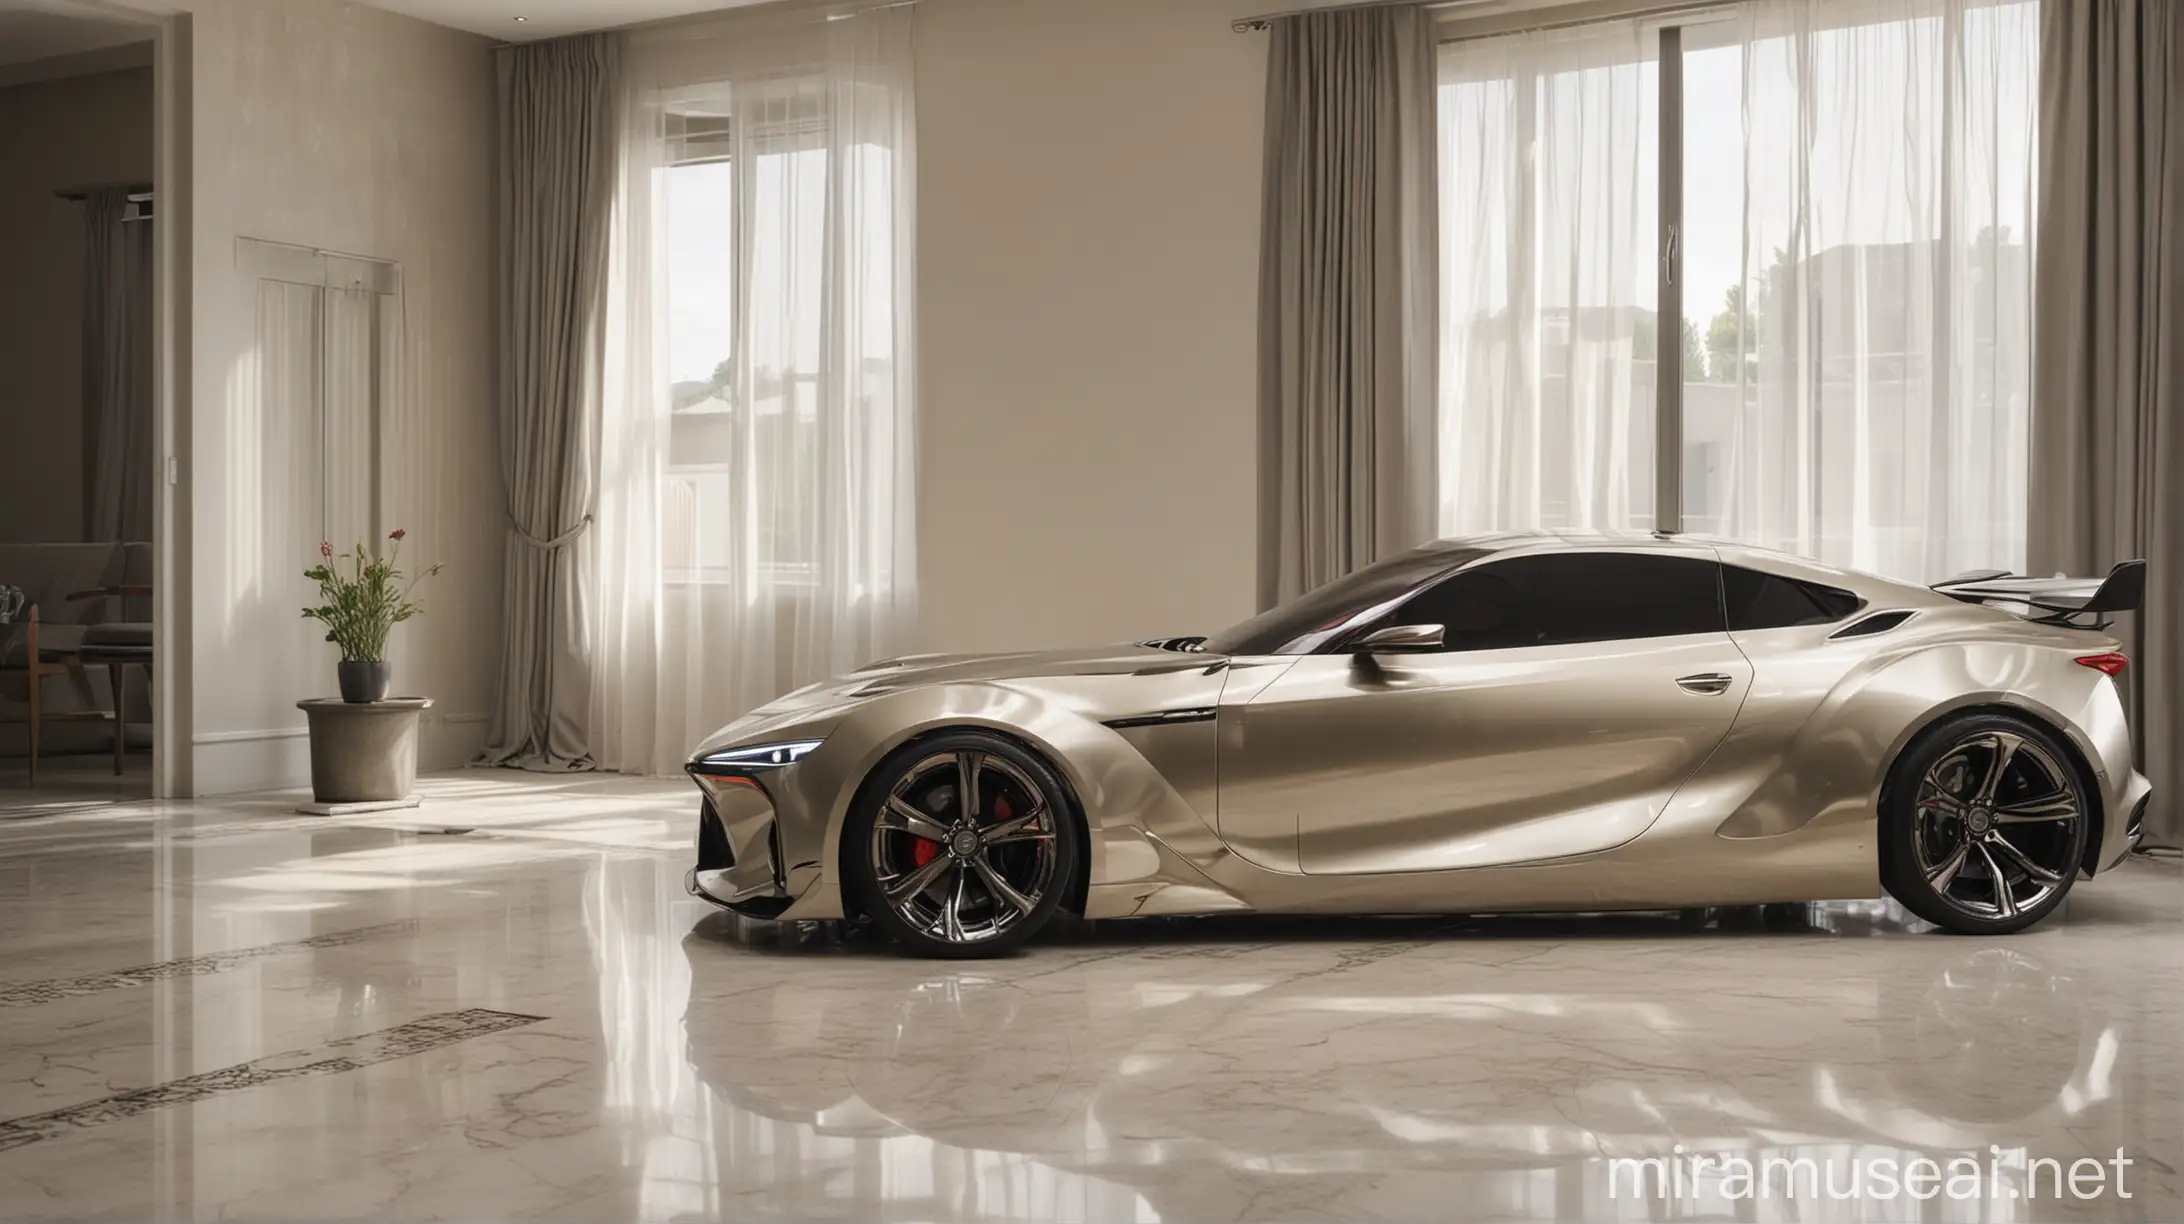 Toyota Celica Concept Car Reborn, AI Design in the villa with shiny floor and window with curtains on background
